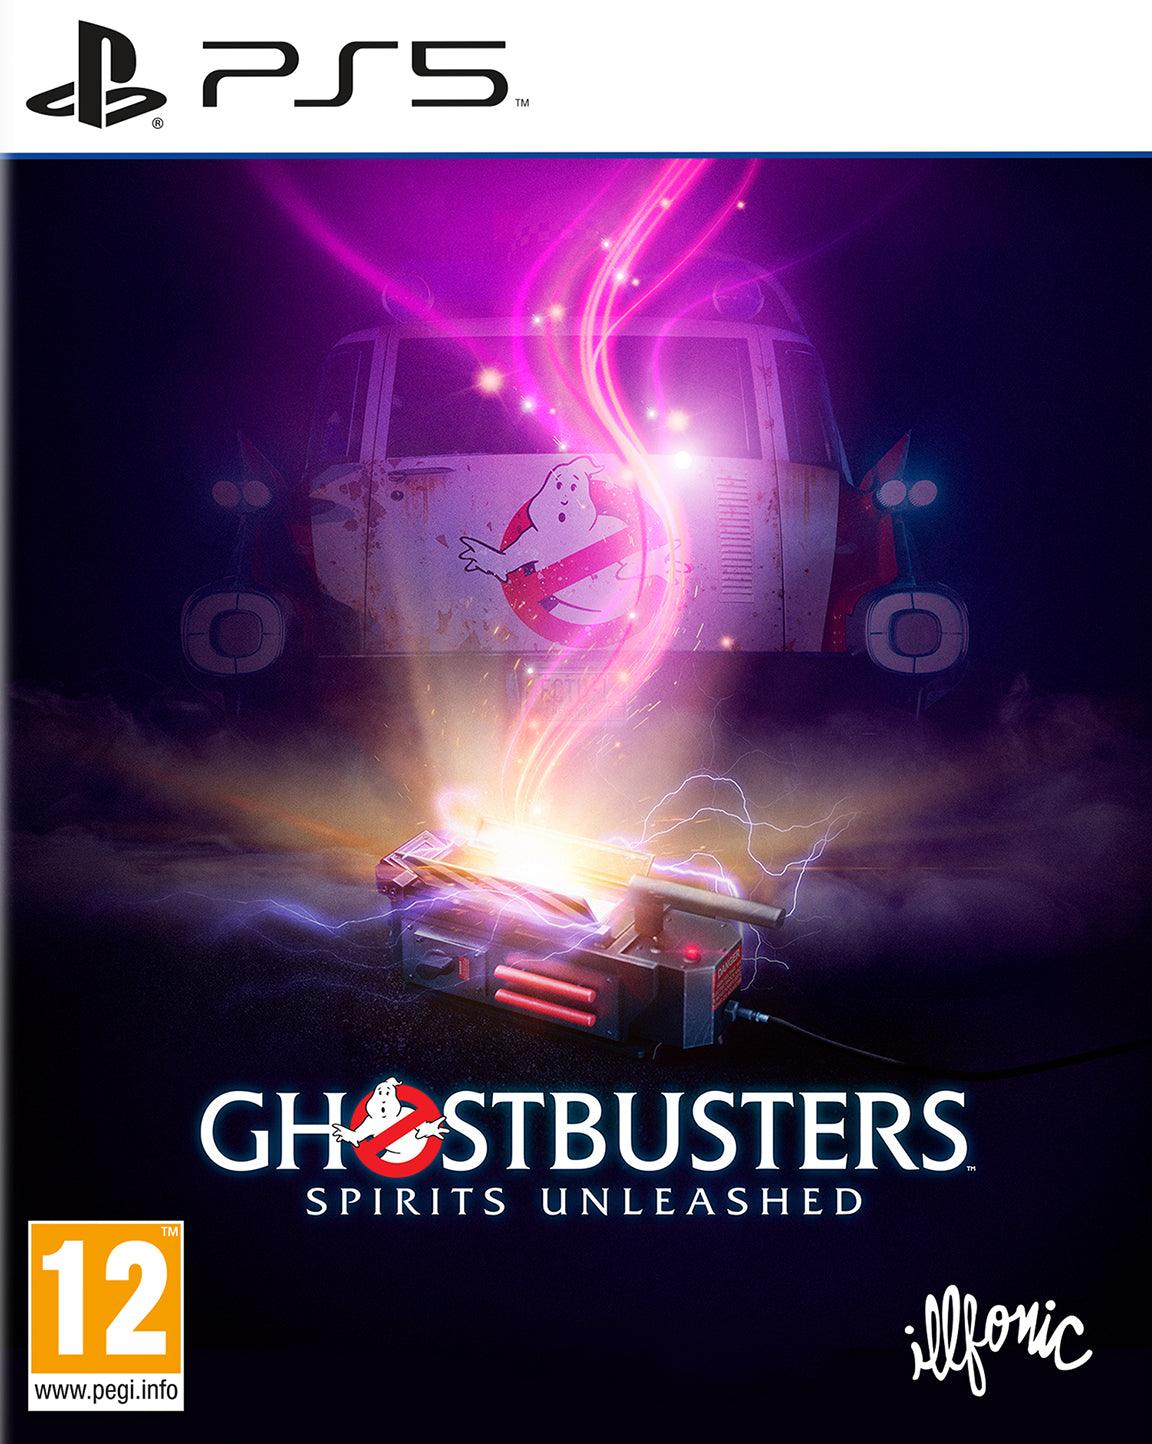 Ghostbusters Spirits Unleashed - Want a New Gadget